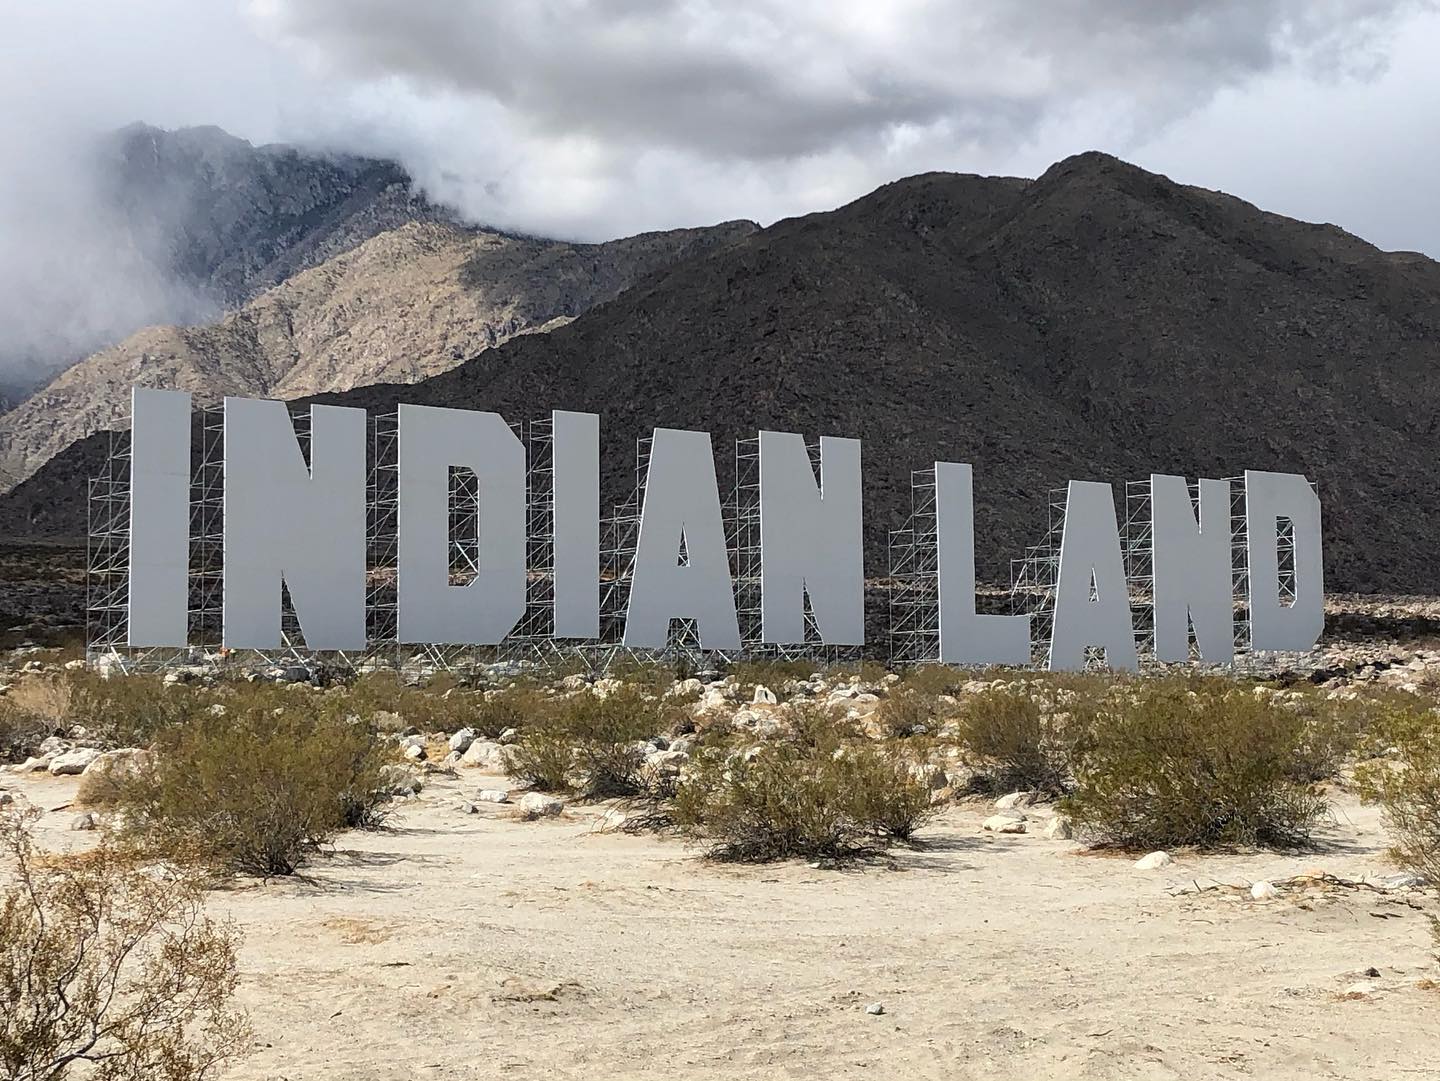 New art - and an important reminder - at the entrance to Palm Springs. #desertx2021